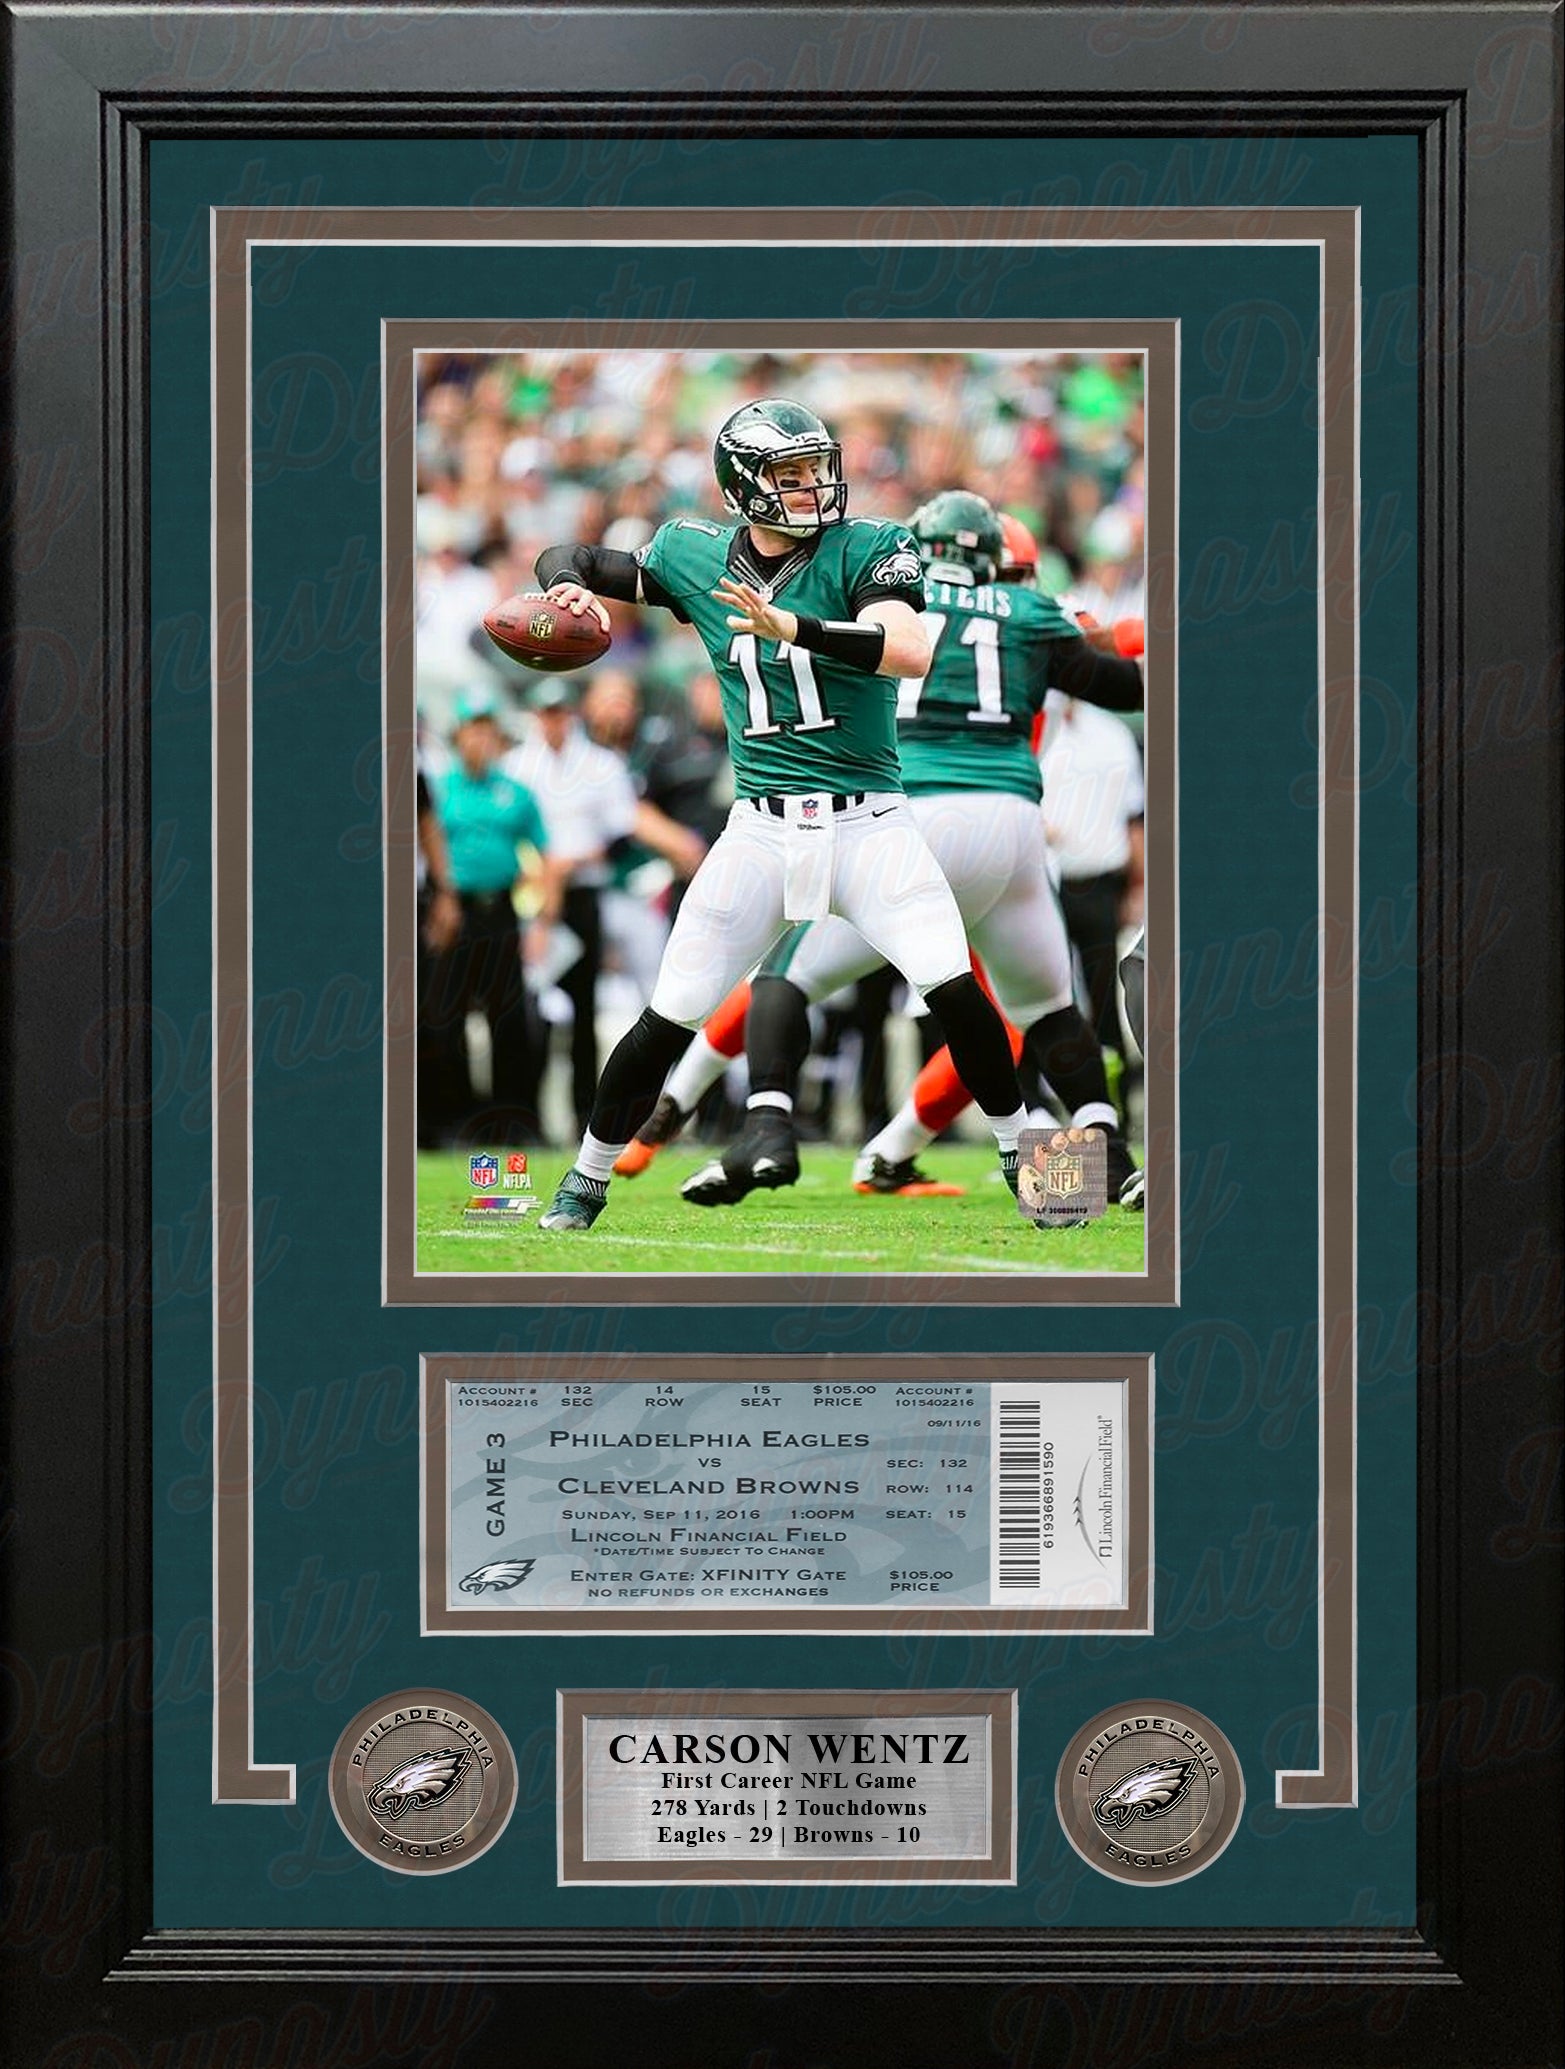 Carson Wentz First Career Win Philadelphia Eagles Framed Photo with Replica 1st Win Game Ticket - Dynasty Sports & Framing 